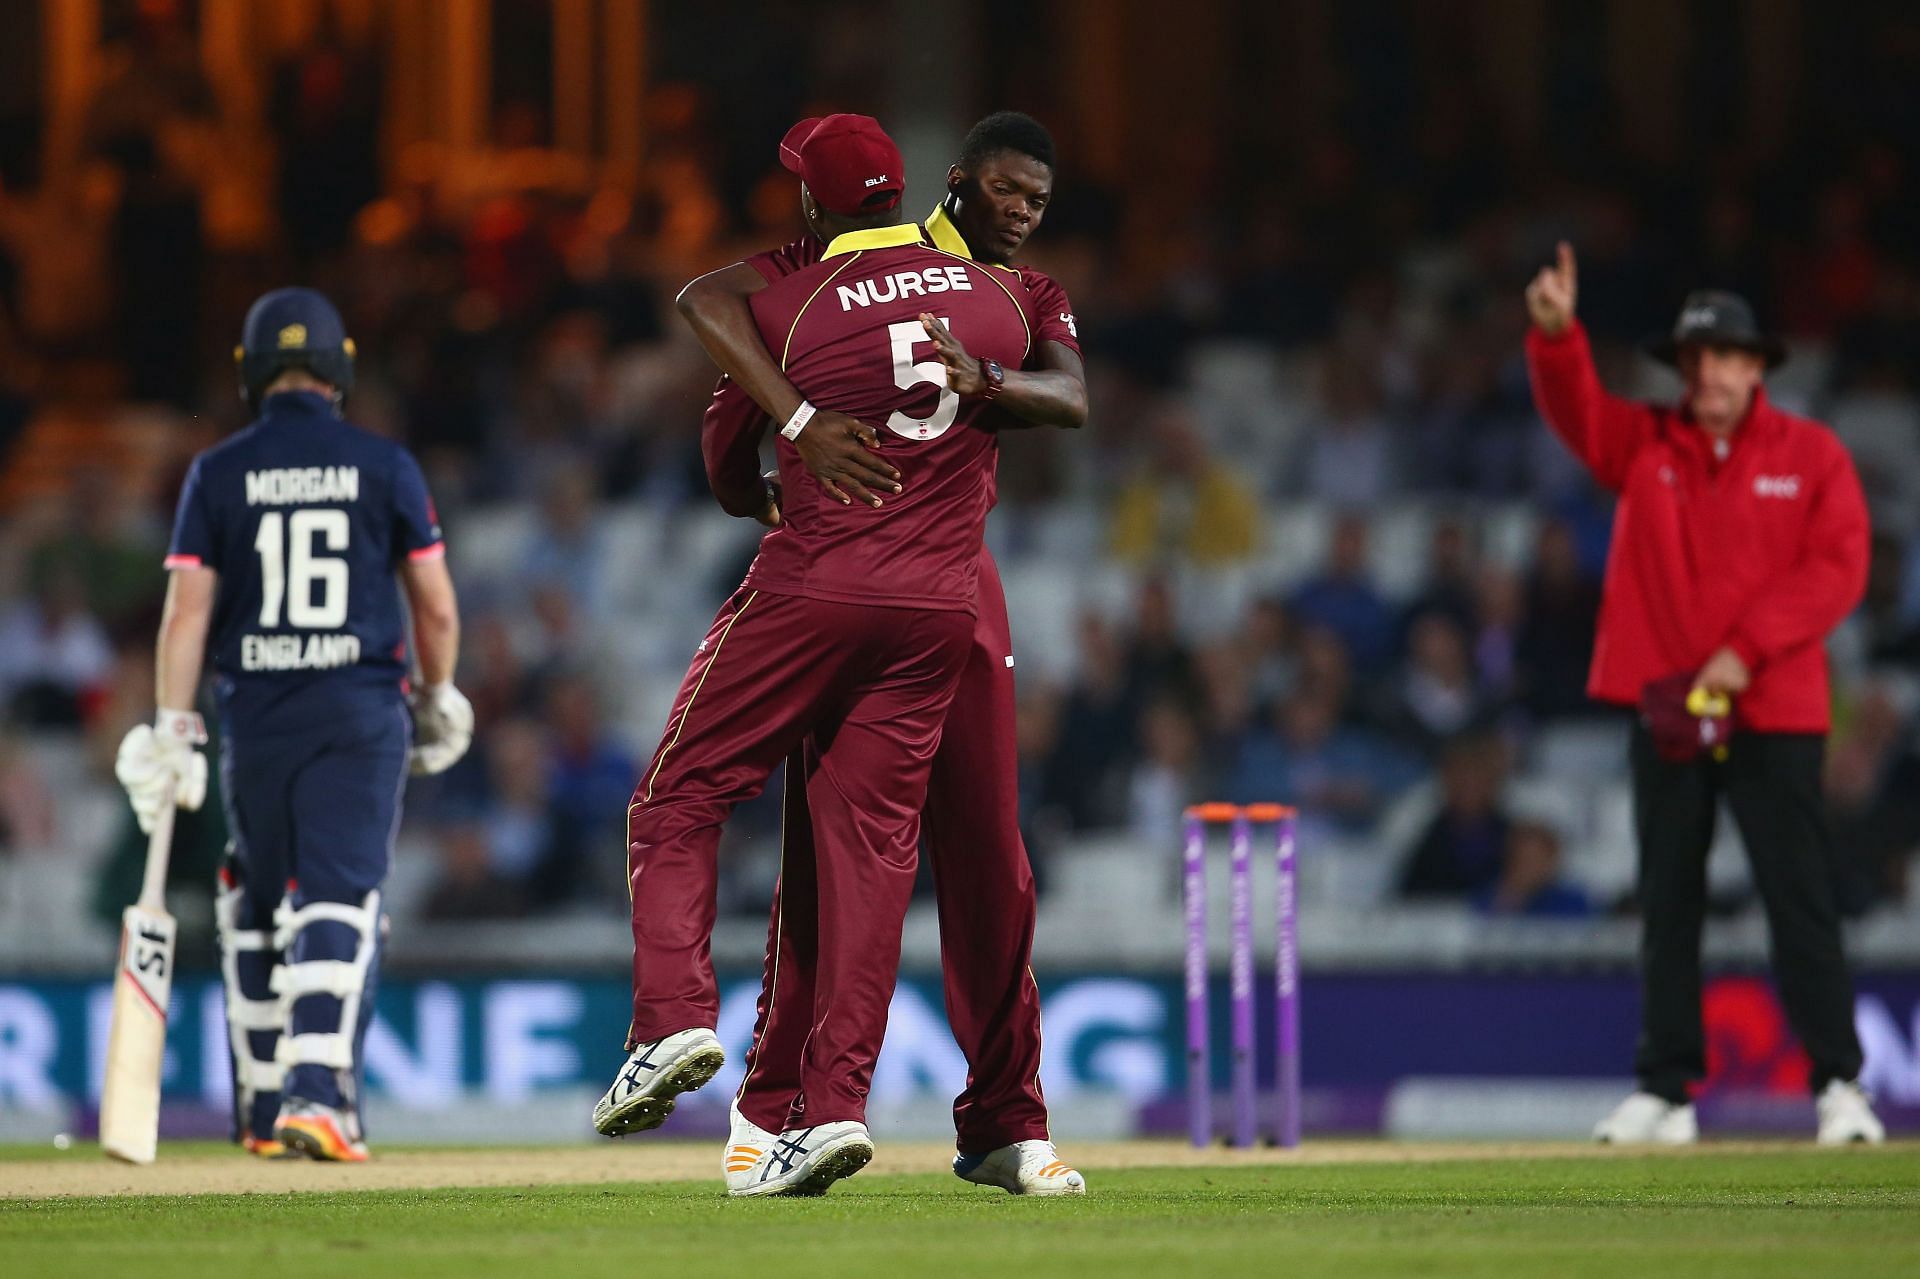 England v West Indies - 4th Royal London One Day International